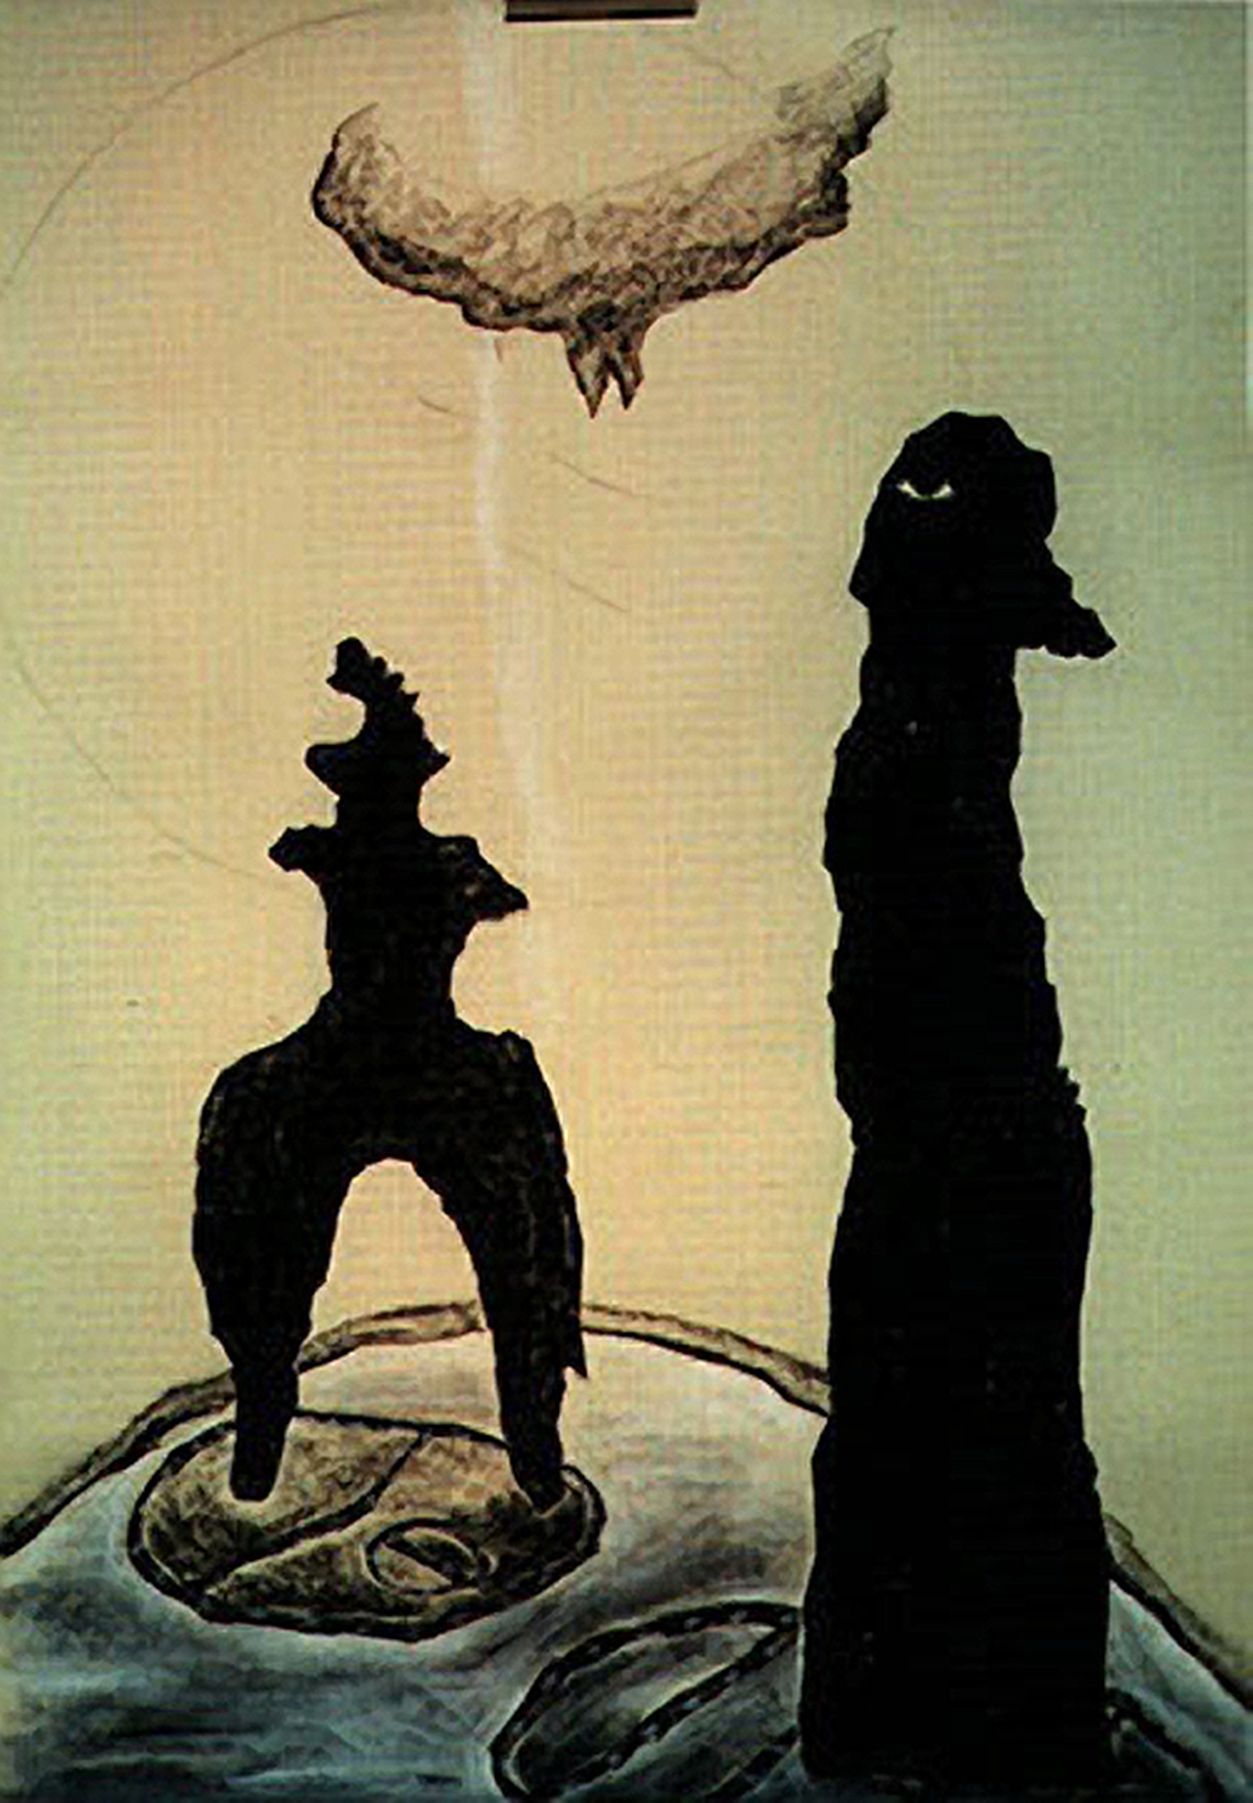 Rites of Passage, Preliminary Sketch, 1991 by Adrian Mauriks.